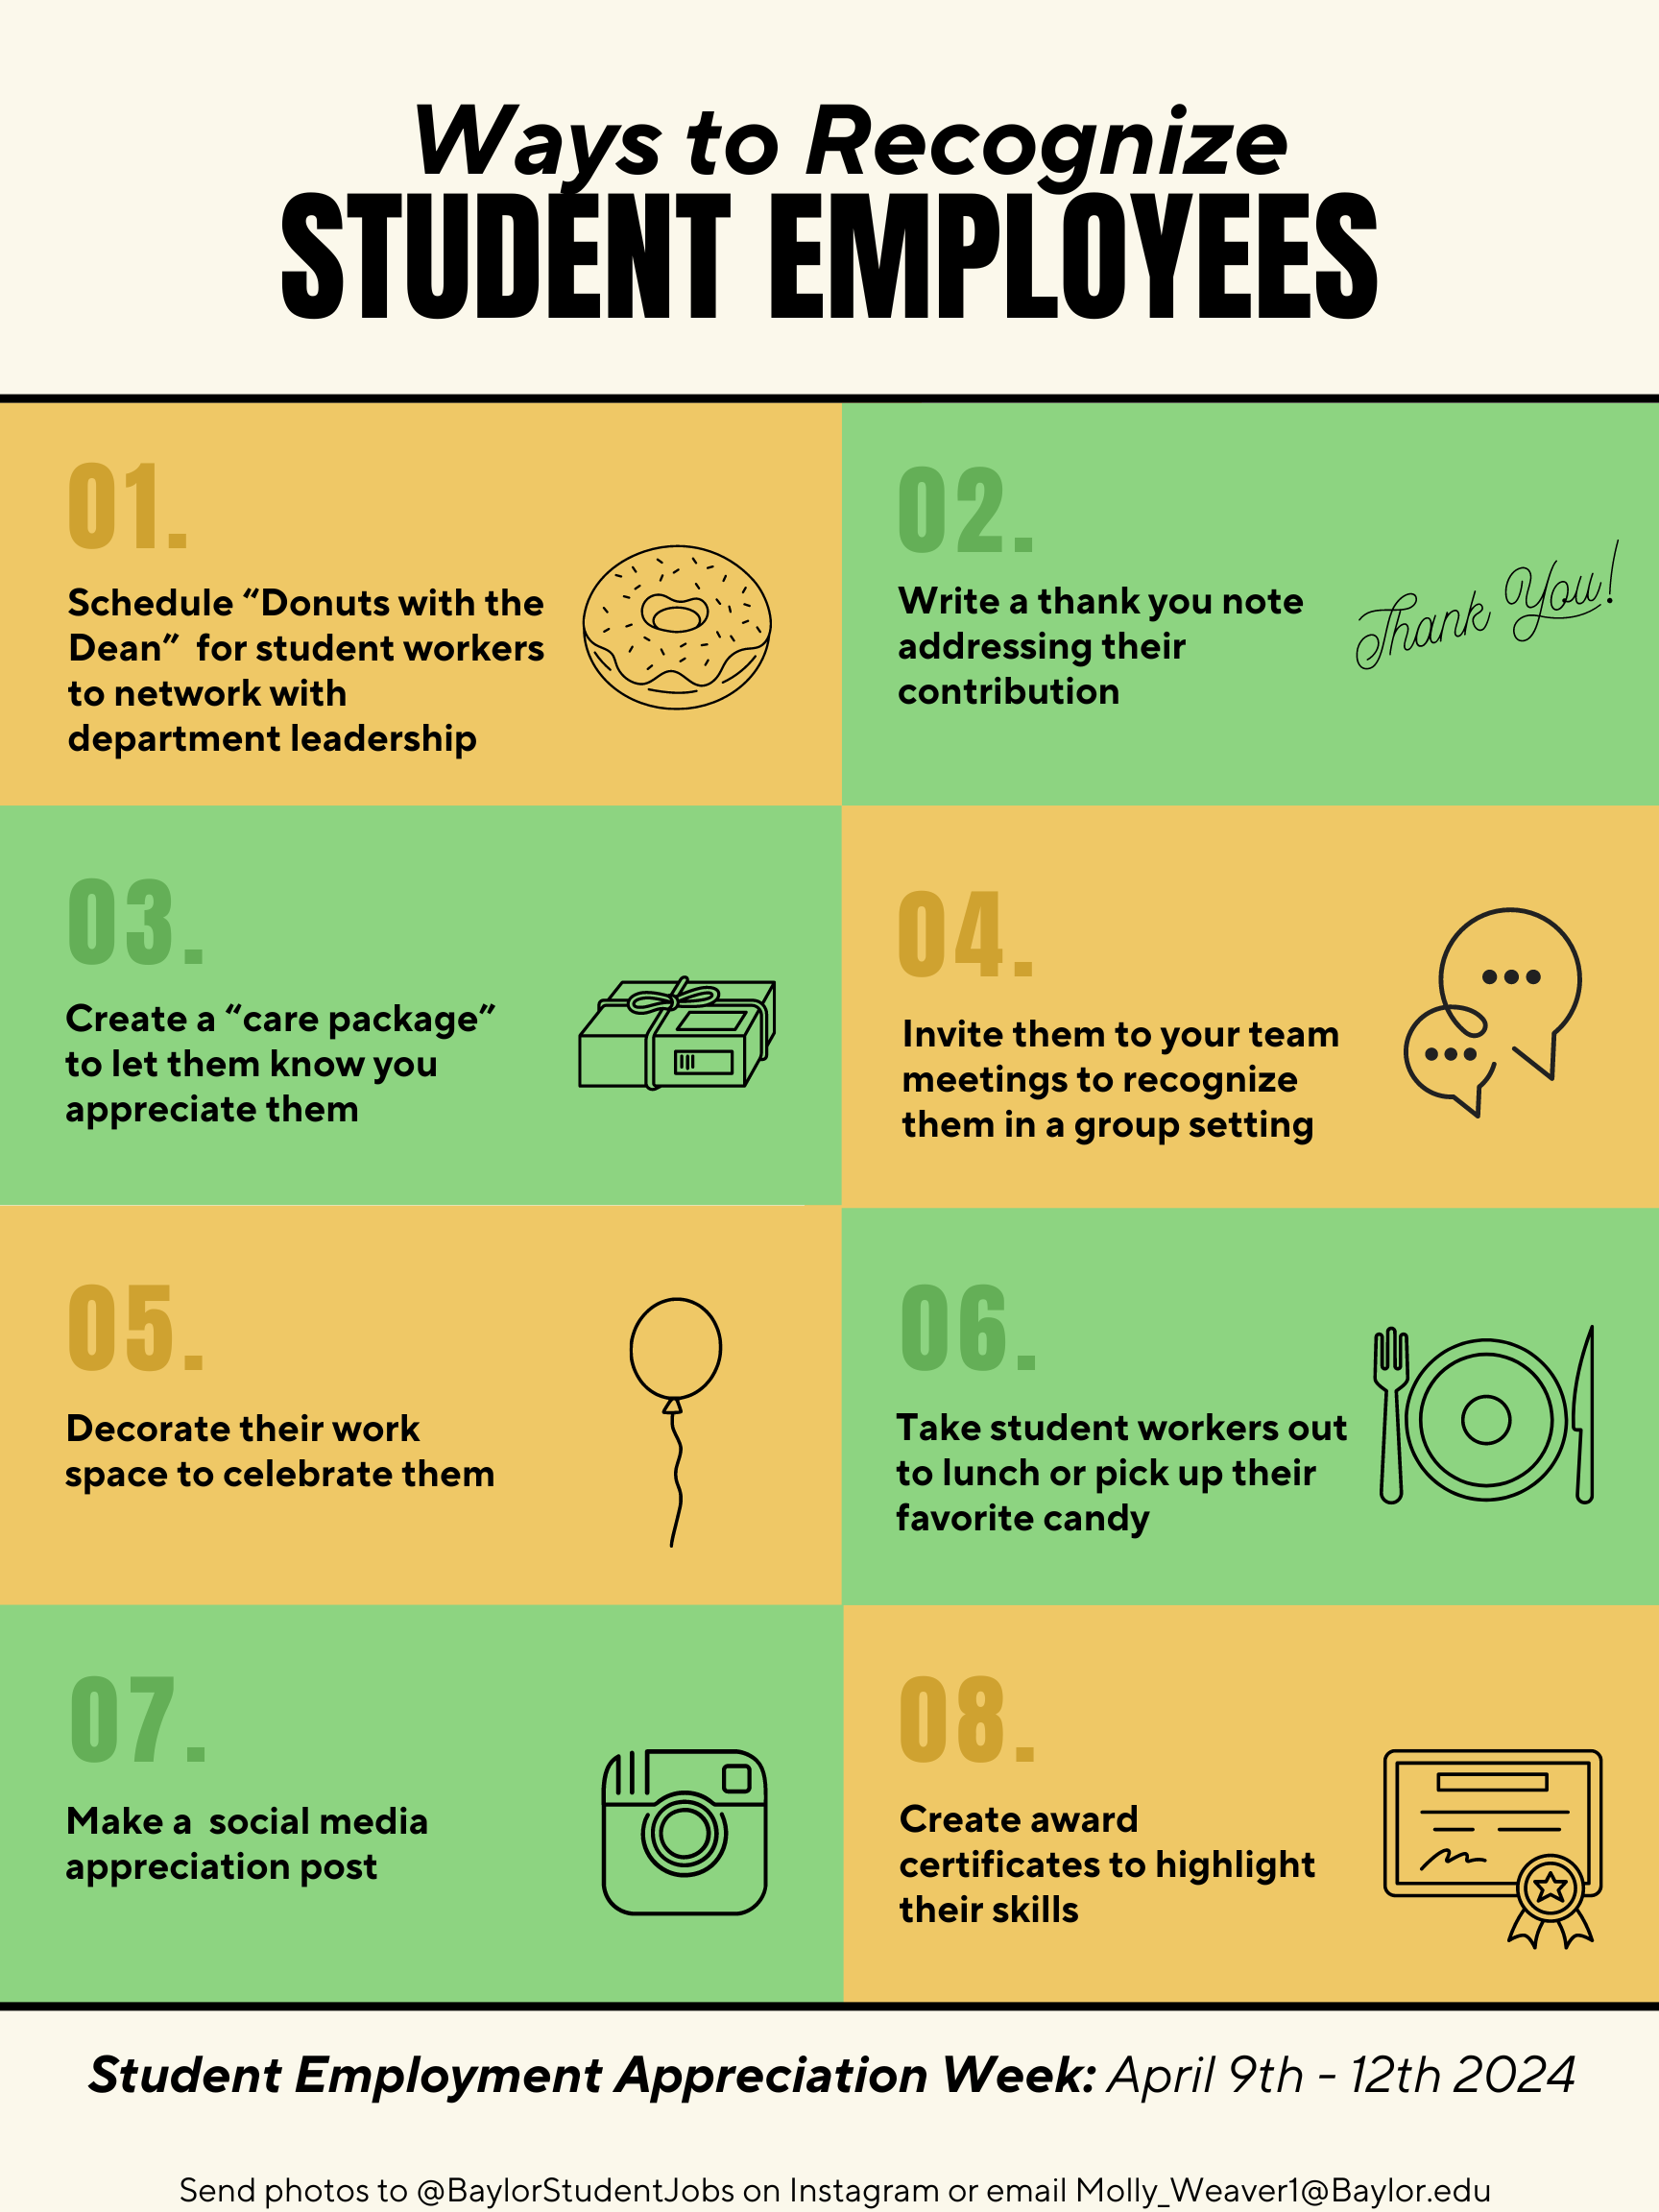 Ways to Recognize student employees graphic